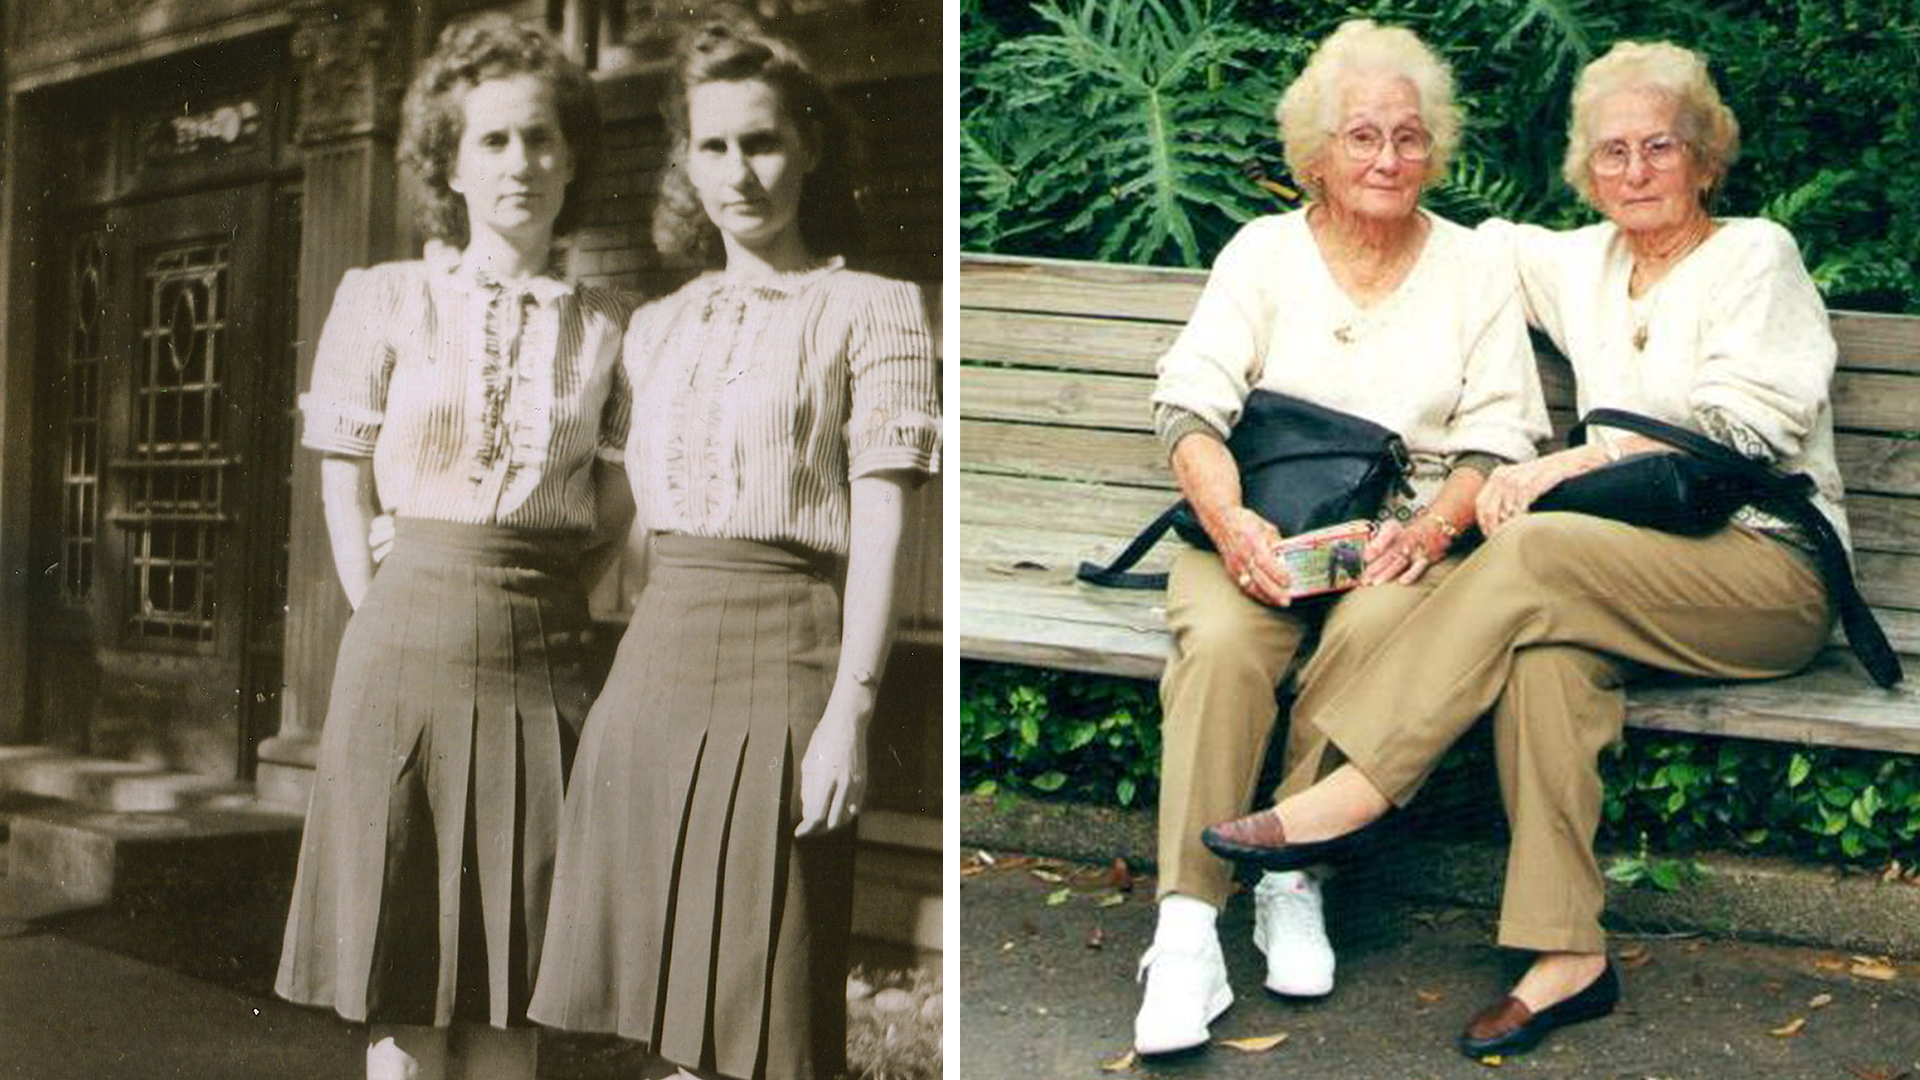 100-year-old twins share unbreakable bond: 'We've never been separated'